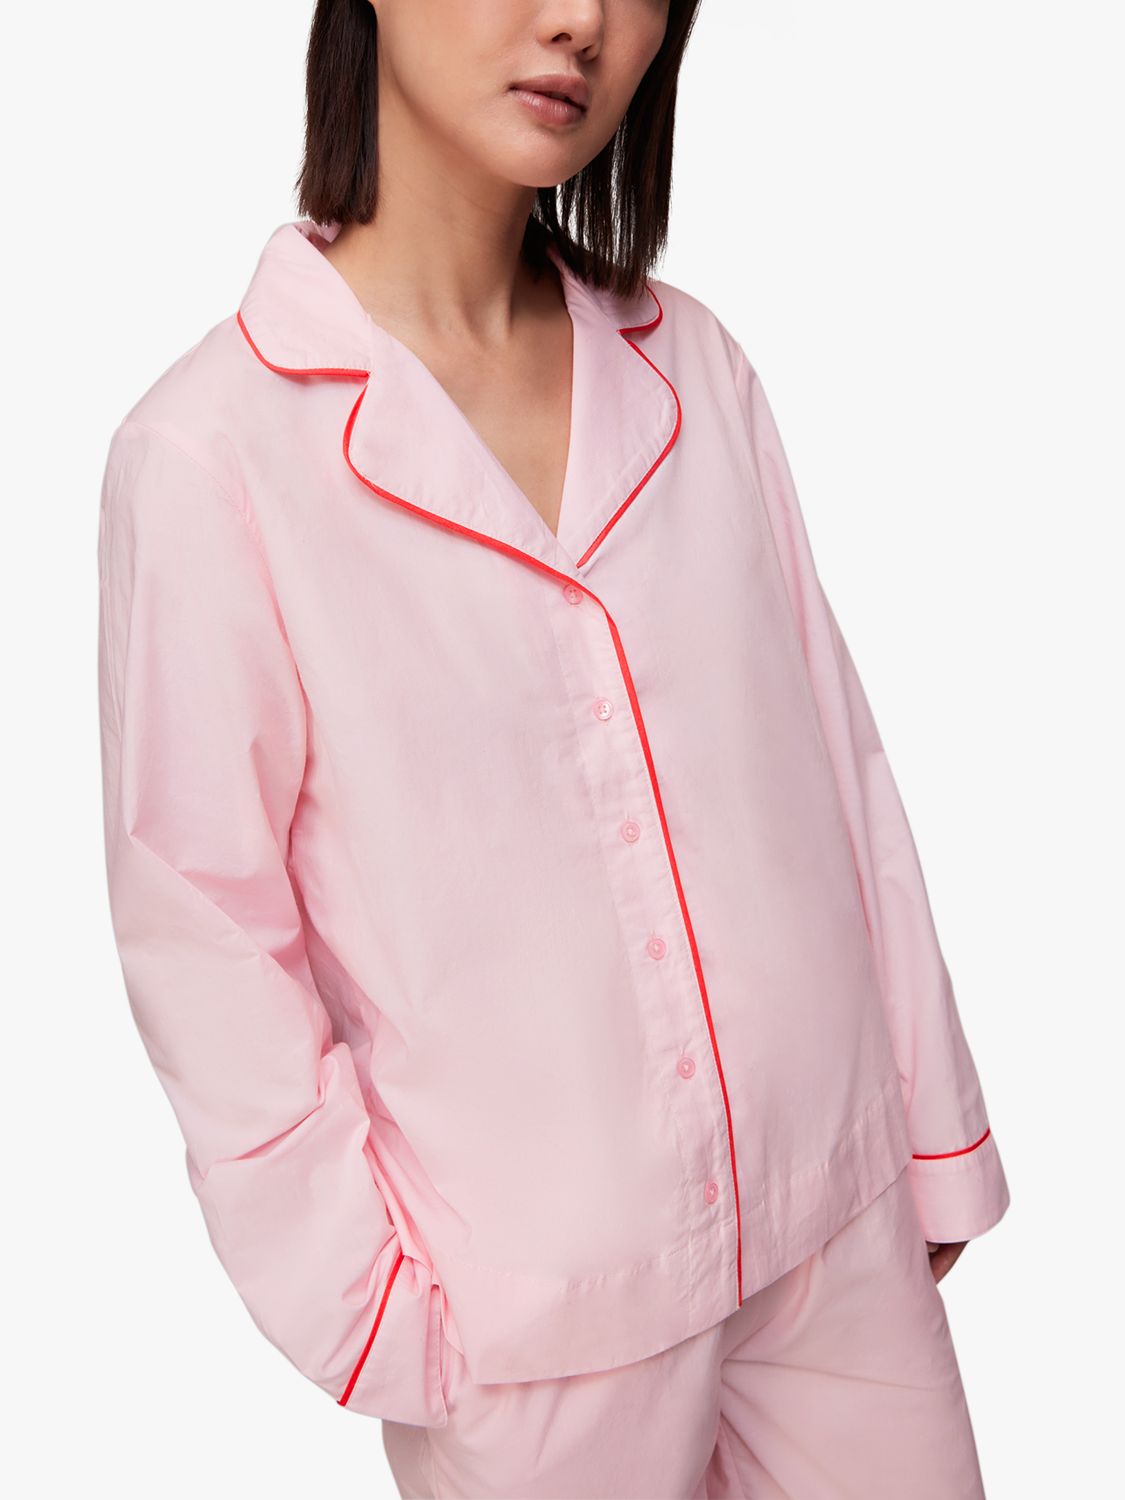 Buy Whistles Contrast Piping Cotton Pyjamas Online at johnlewis.com